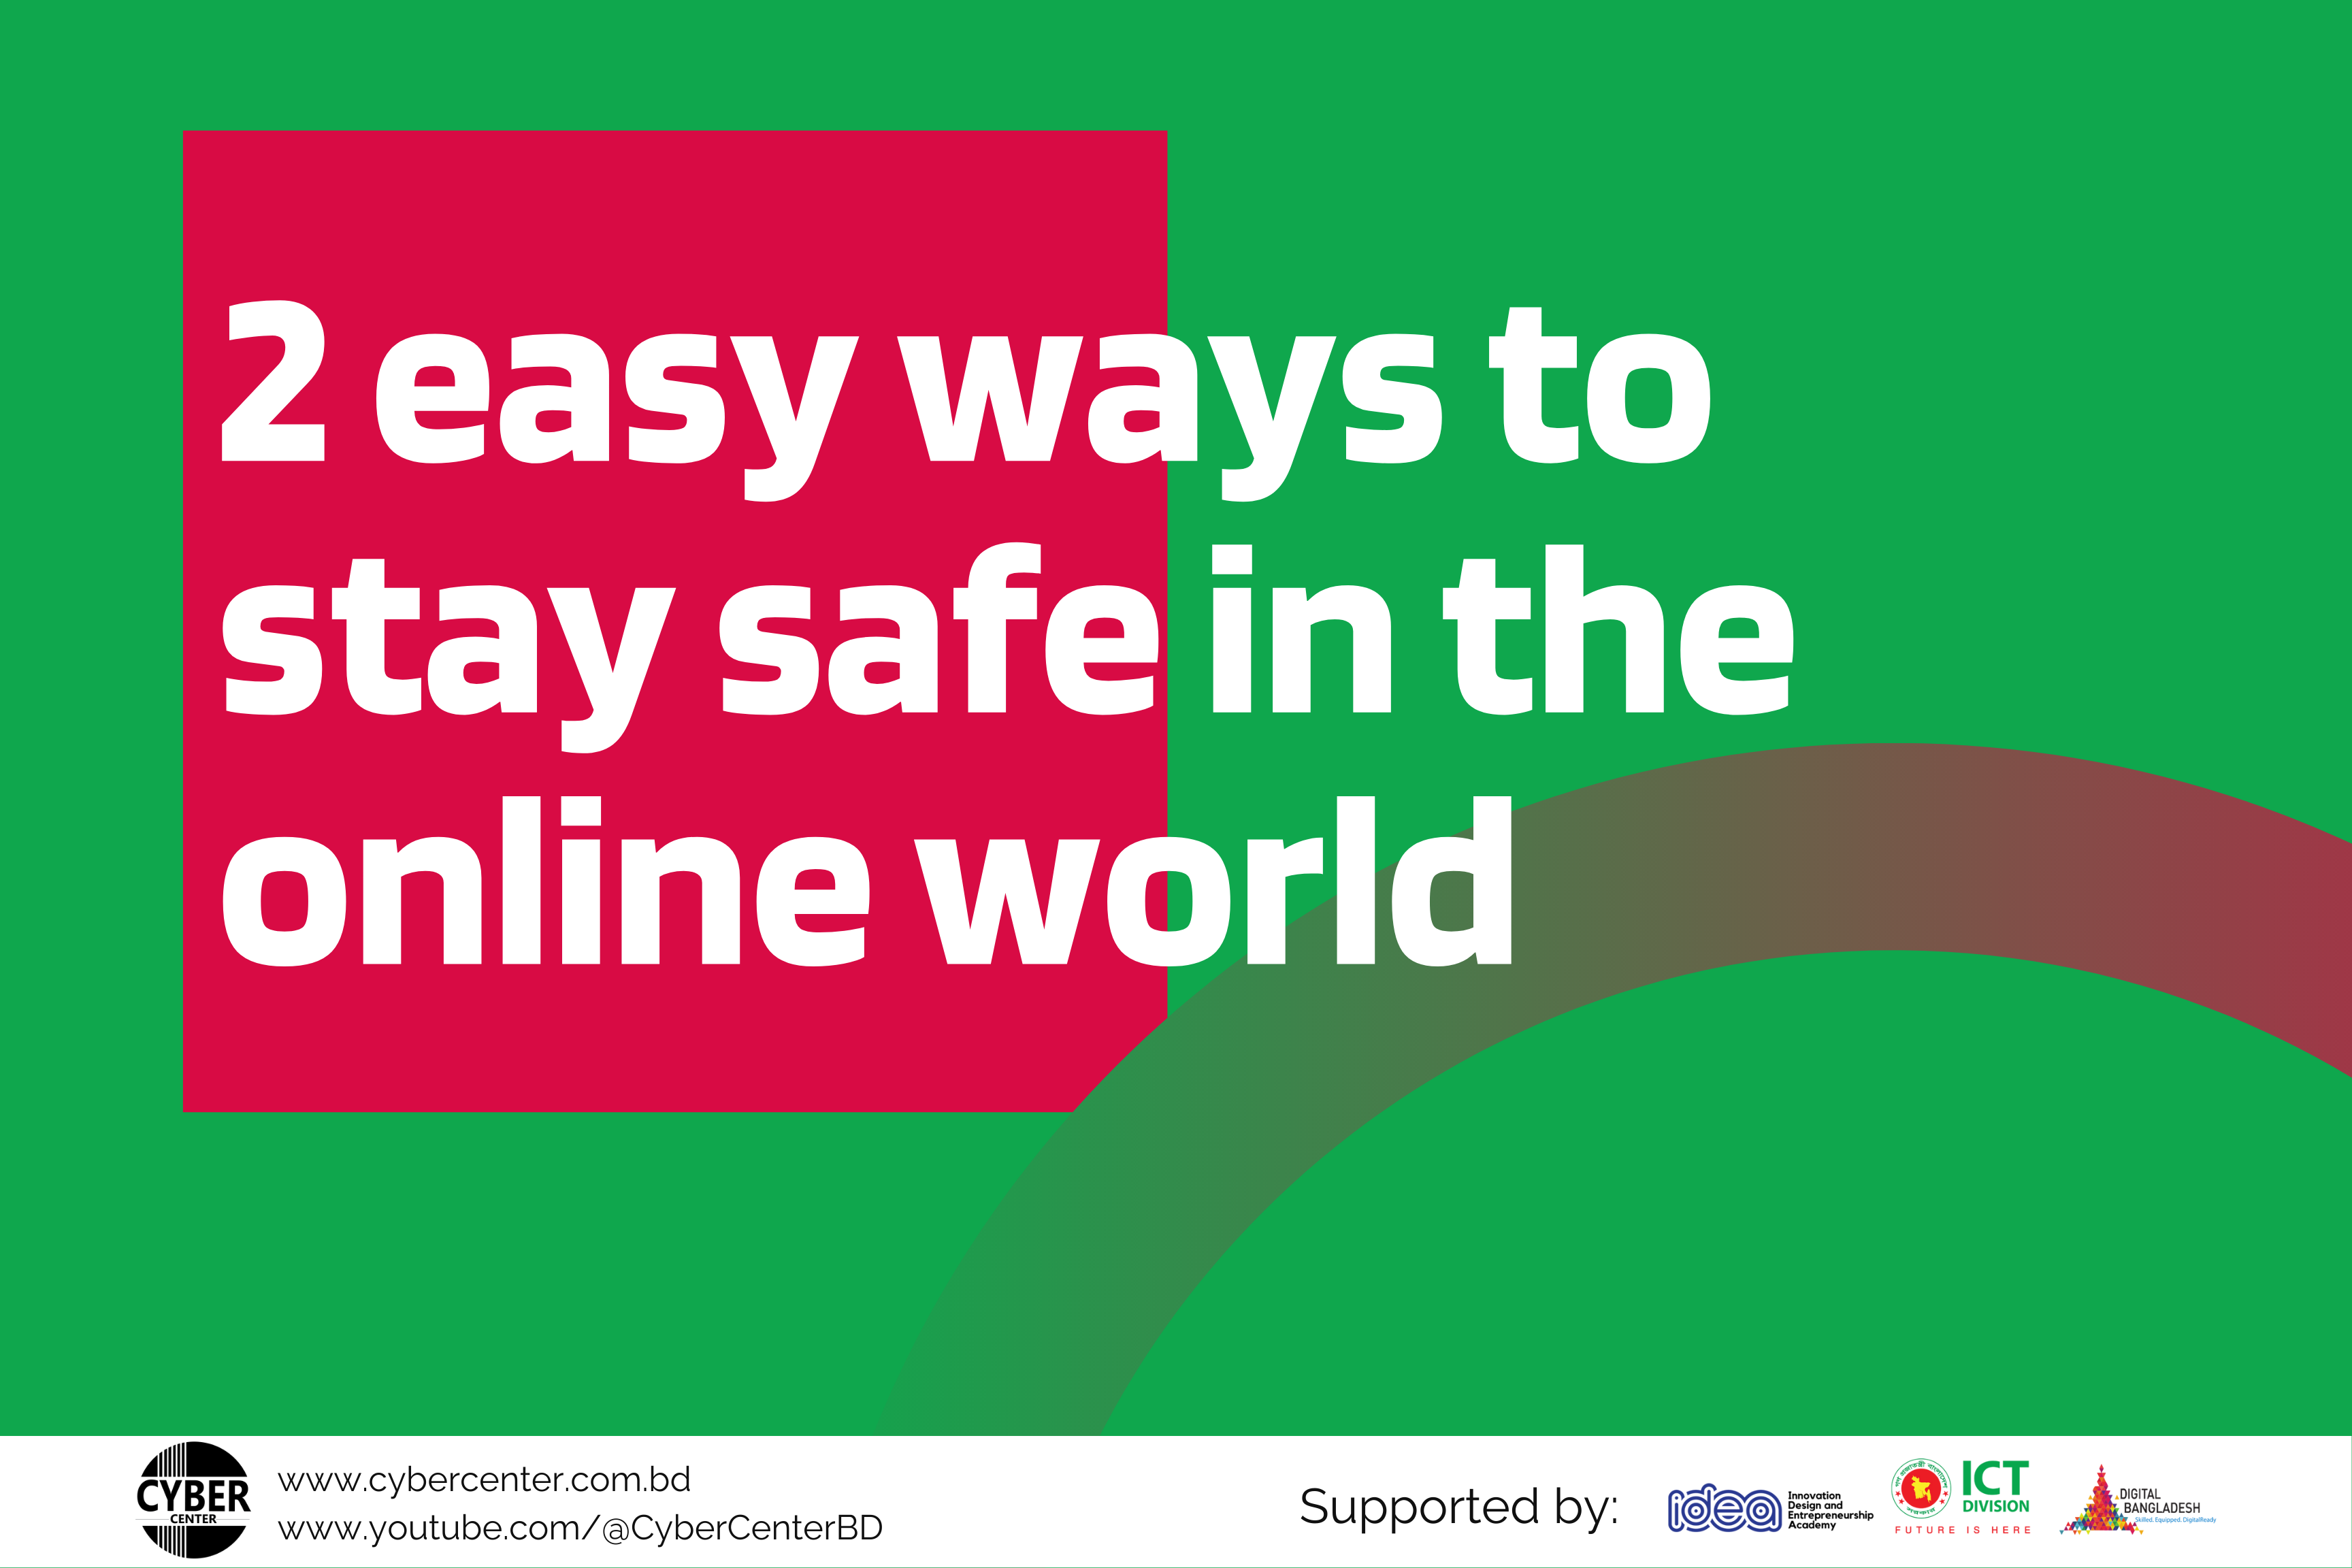 2 easy ways to stay safe in the online world